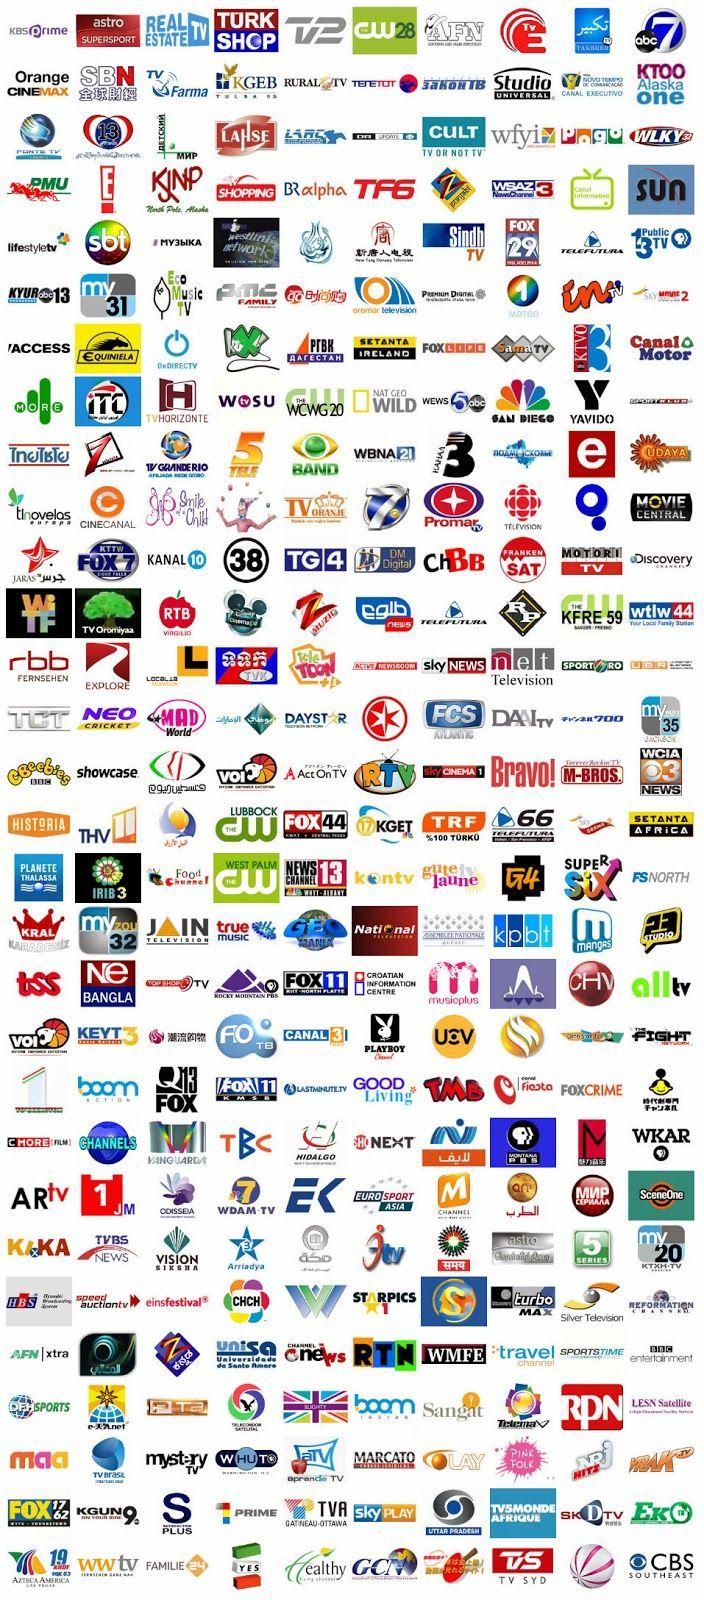 All TV Channels Logo - TV Channel Logos and Names | Logos | Pinterest | Tv channel logo ...